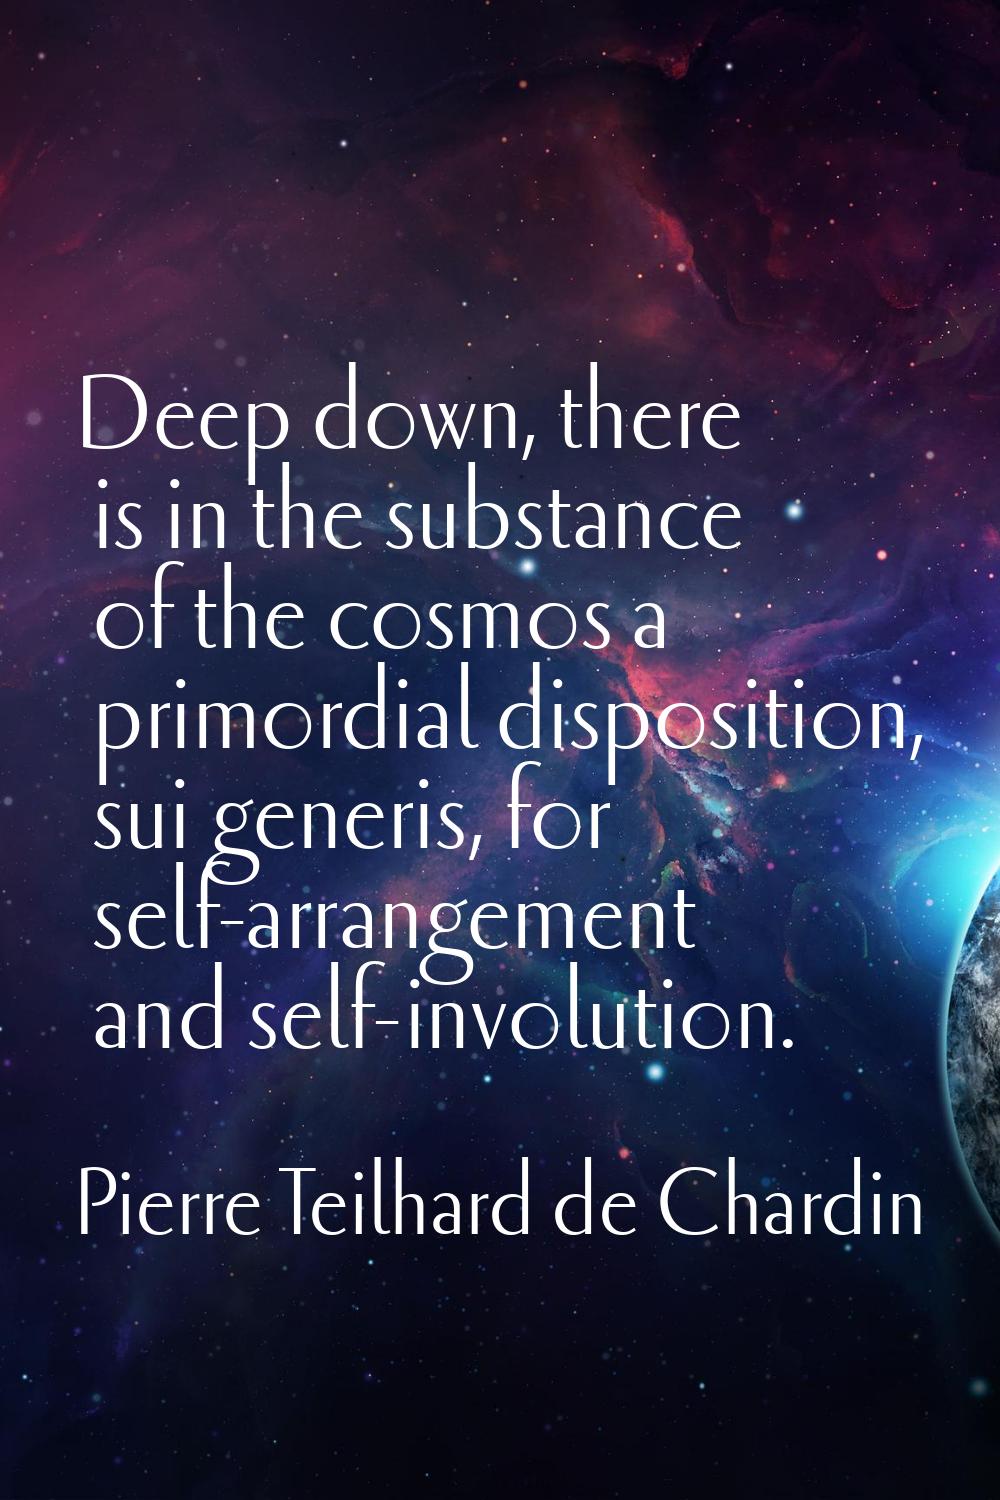 Deep down, there is in the substance of the cosmos a primordial disposition, sui generis, for self-